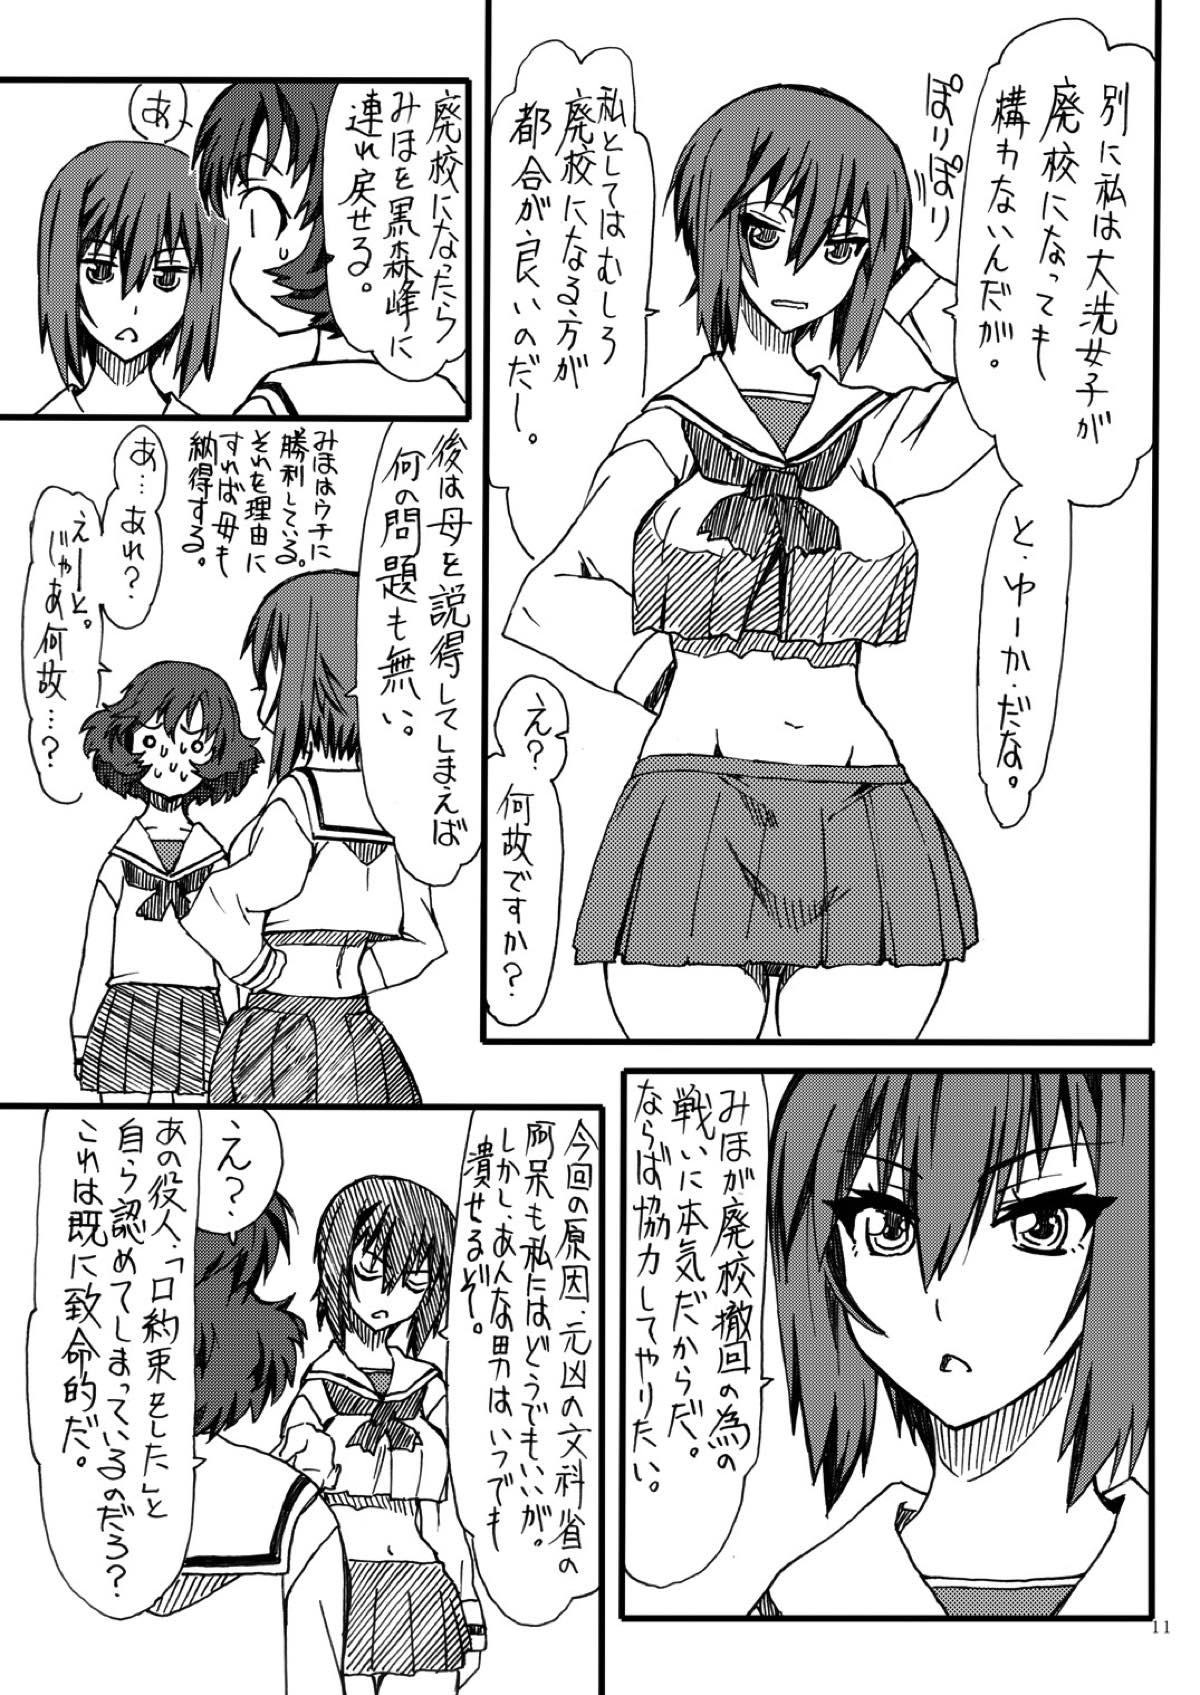 Pica MahoPan 2 - Girls und panzer Atm - Page 10